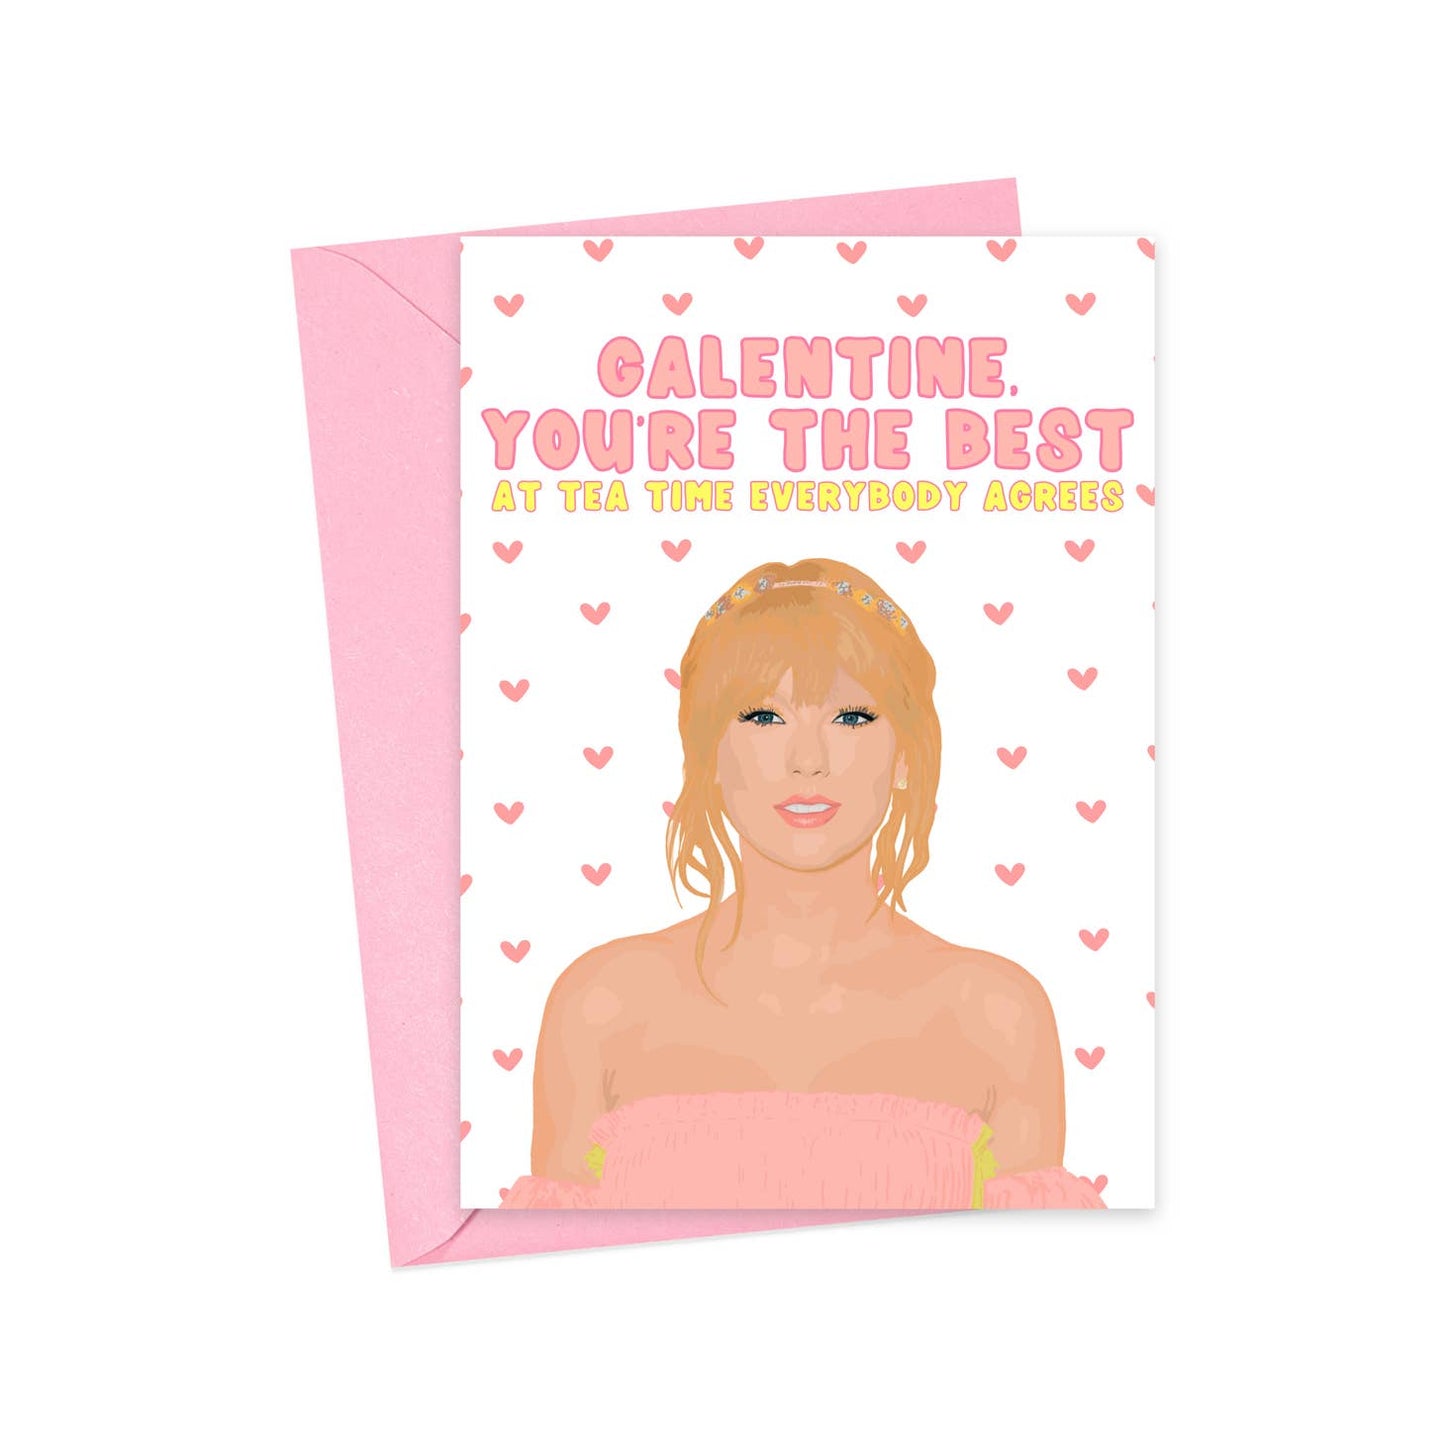 Taylor Swift Galentine's Day Card